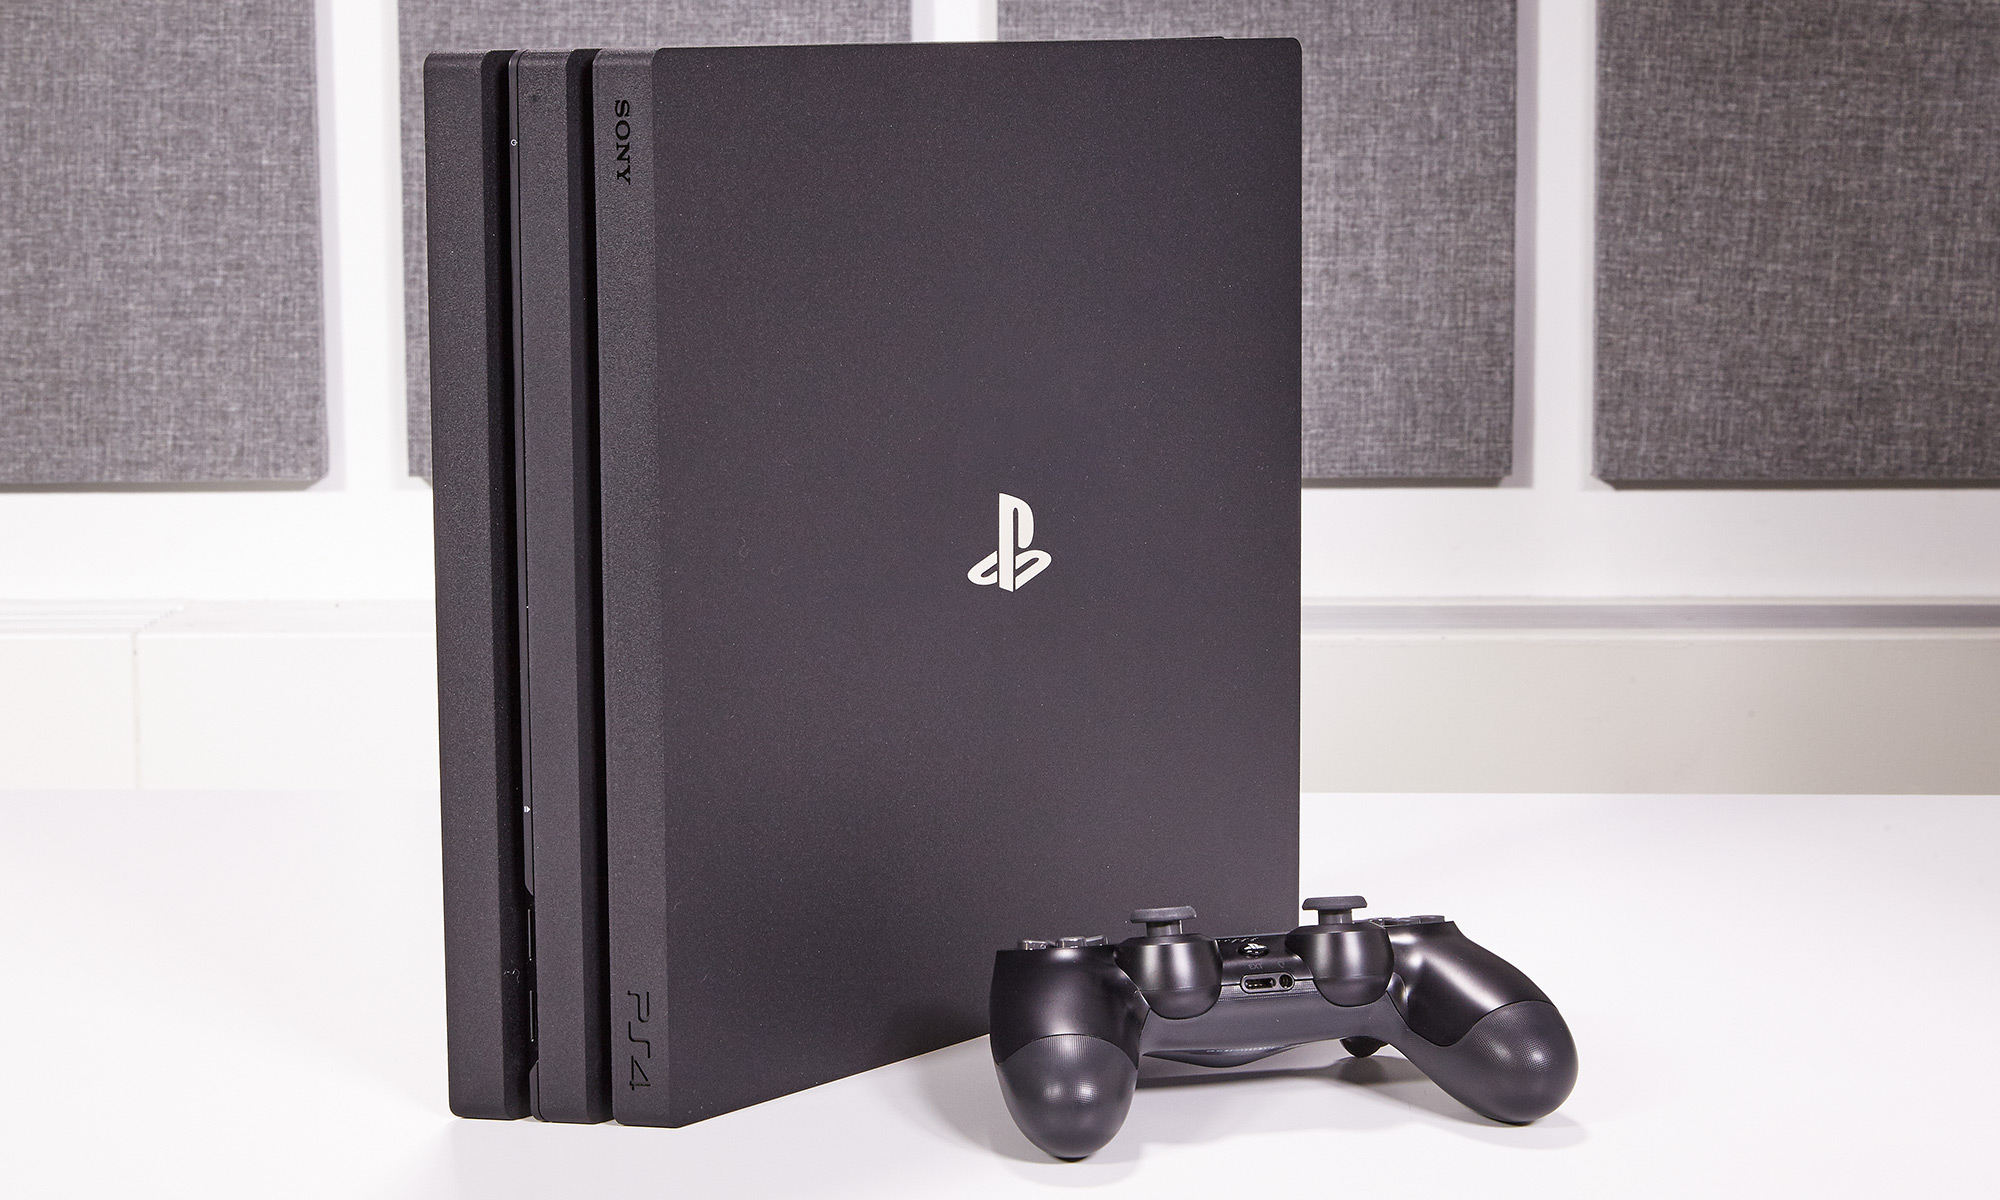 Verleden Carrière Ontspannend PS4 Pro Review: The 4K Console to Beat | Tom's Guide